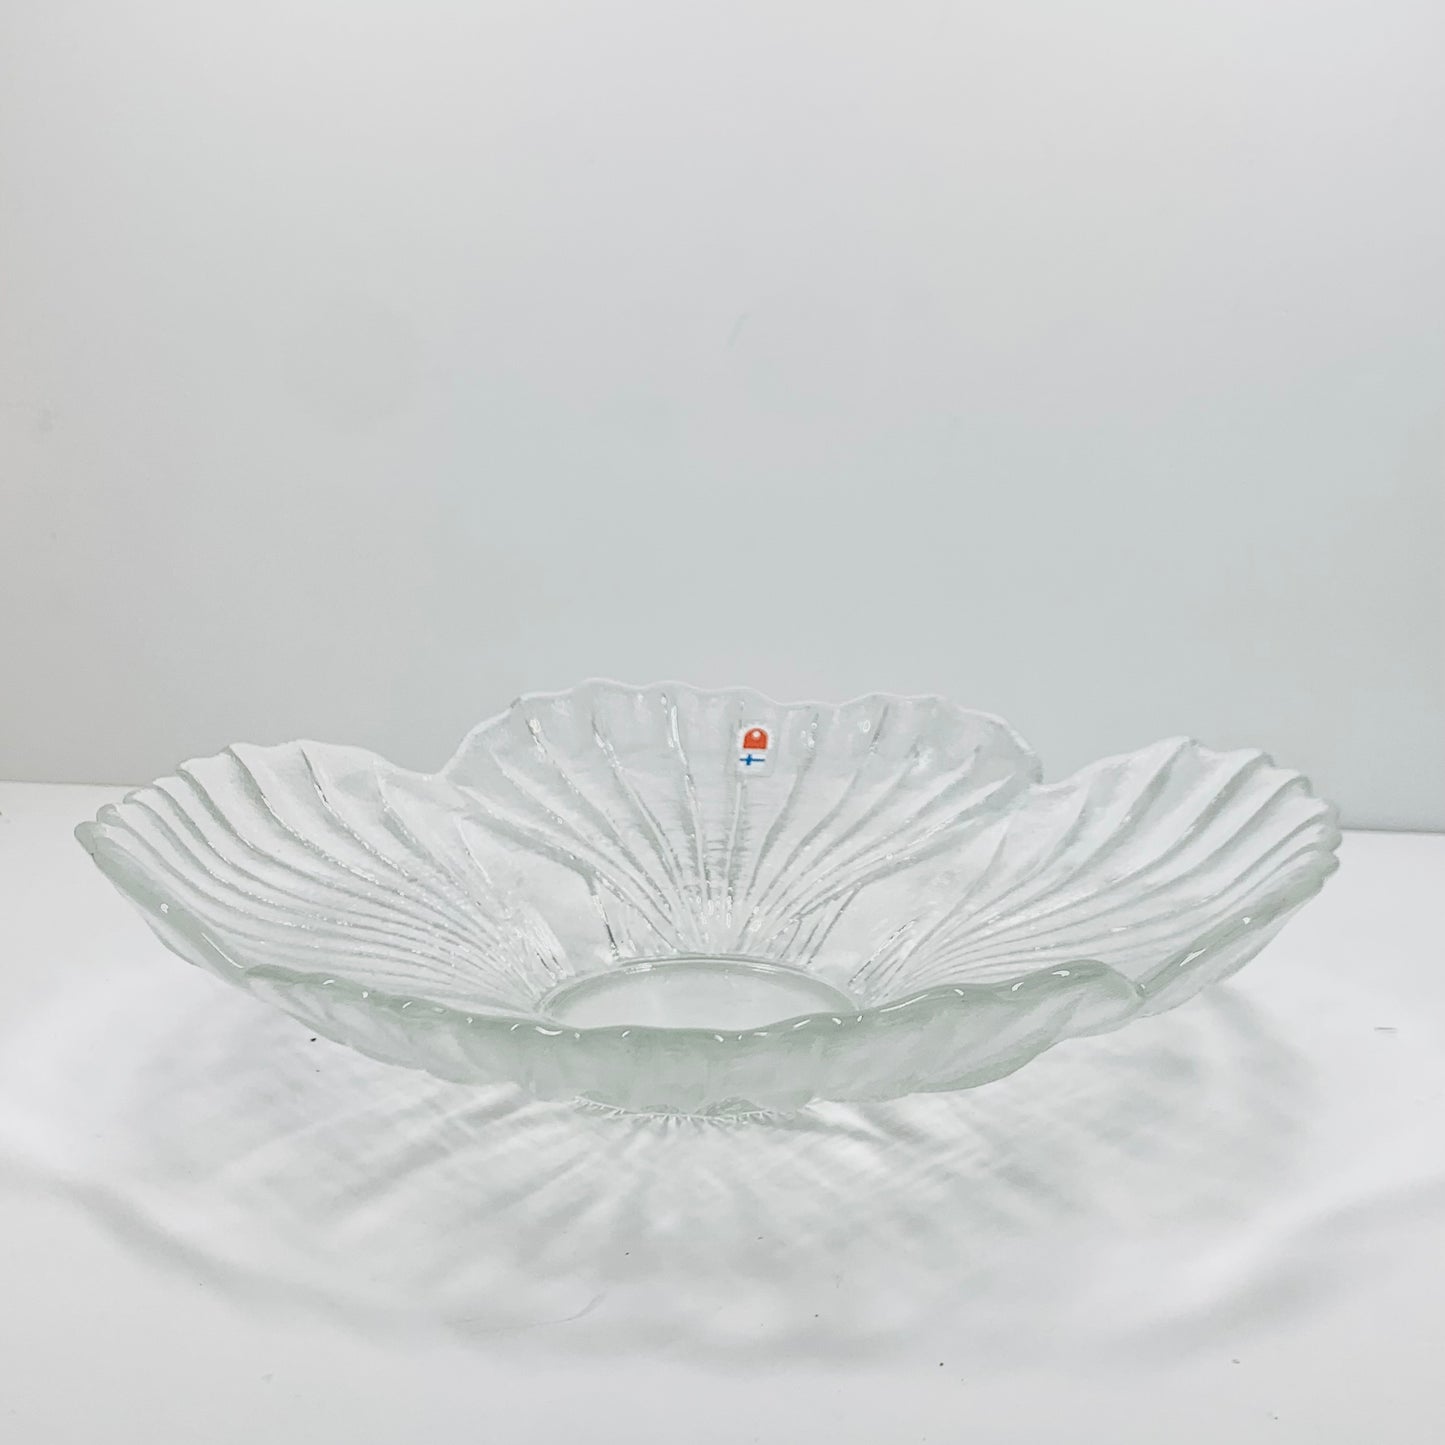 Extremely rare 1970s Finnish Humppila flower shape glass serving plate/fruit bowl